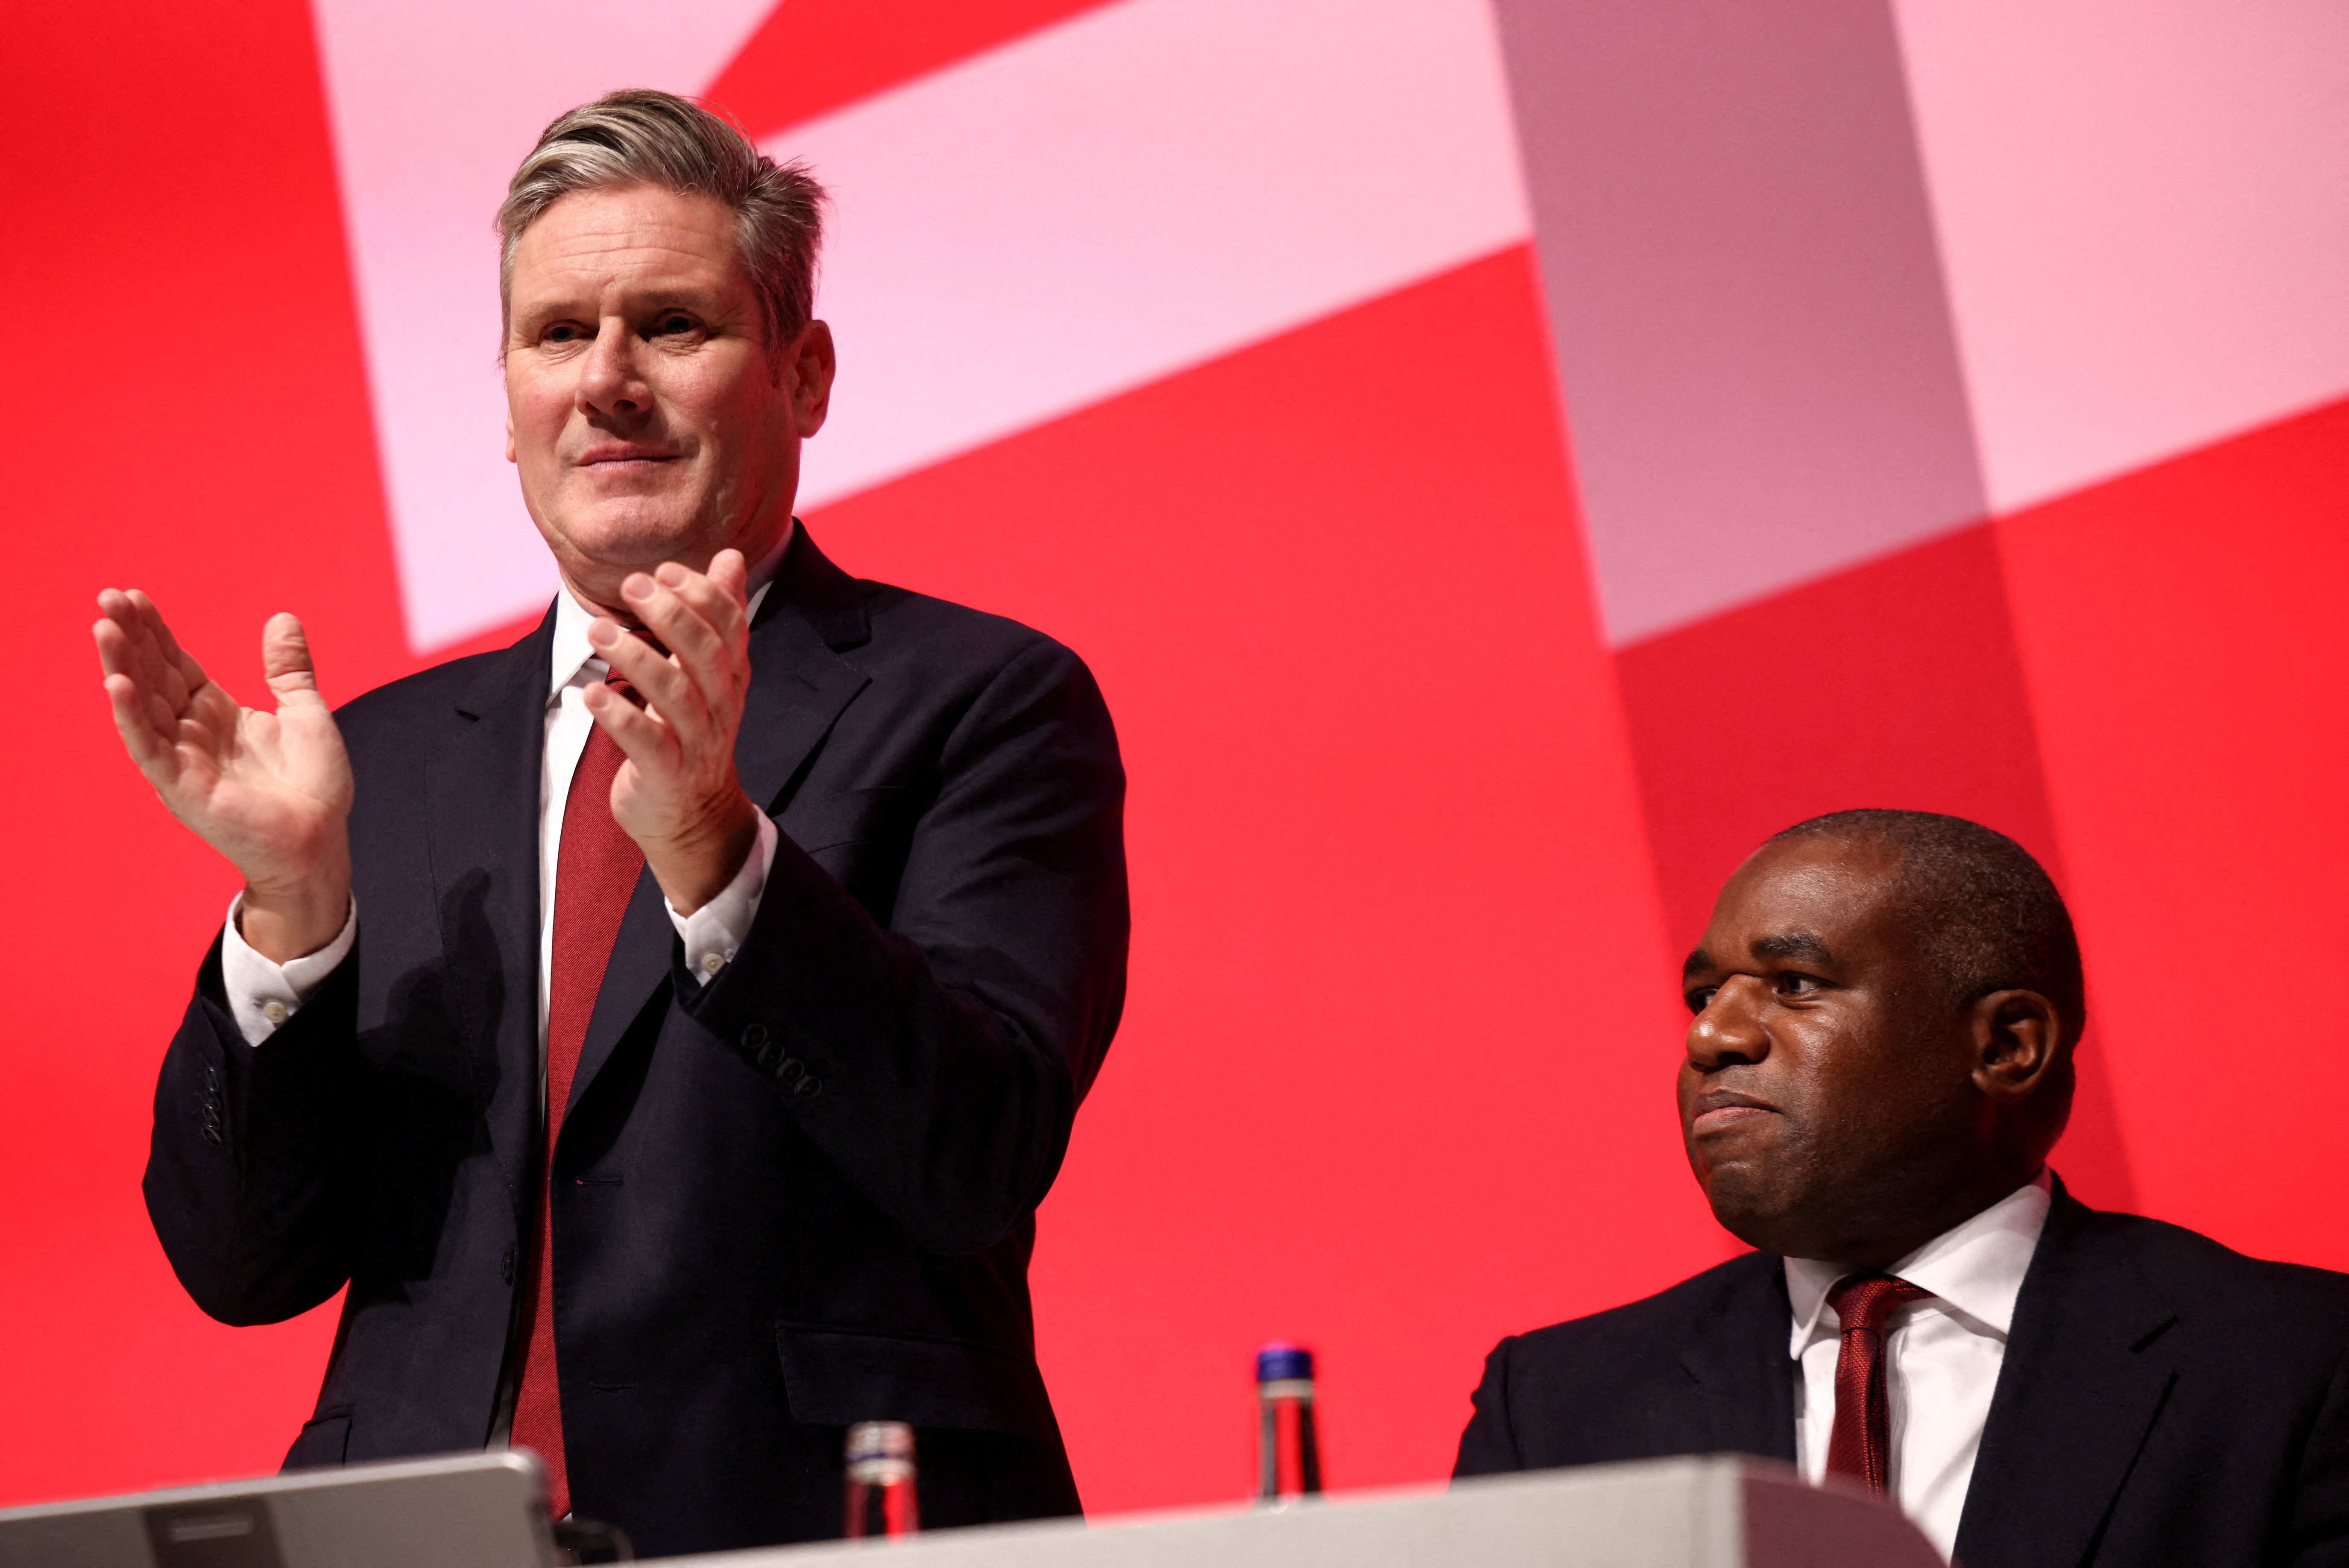 British Labour Party leader Keir Starmer applauds next to Shadow Foreign Secretary David Lammy during Britain's Labour Party annual conference